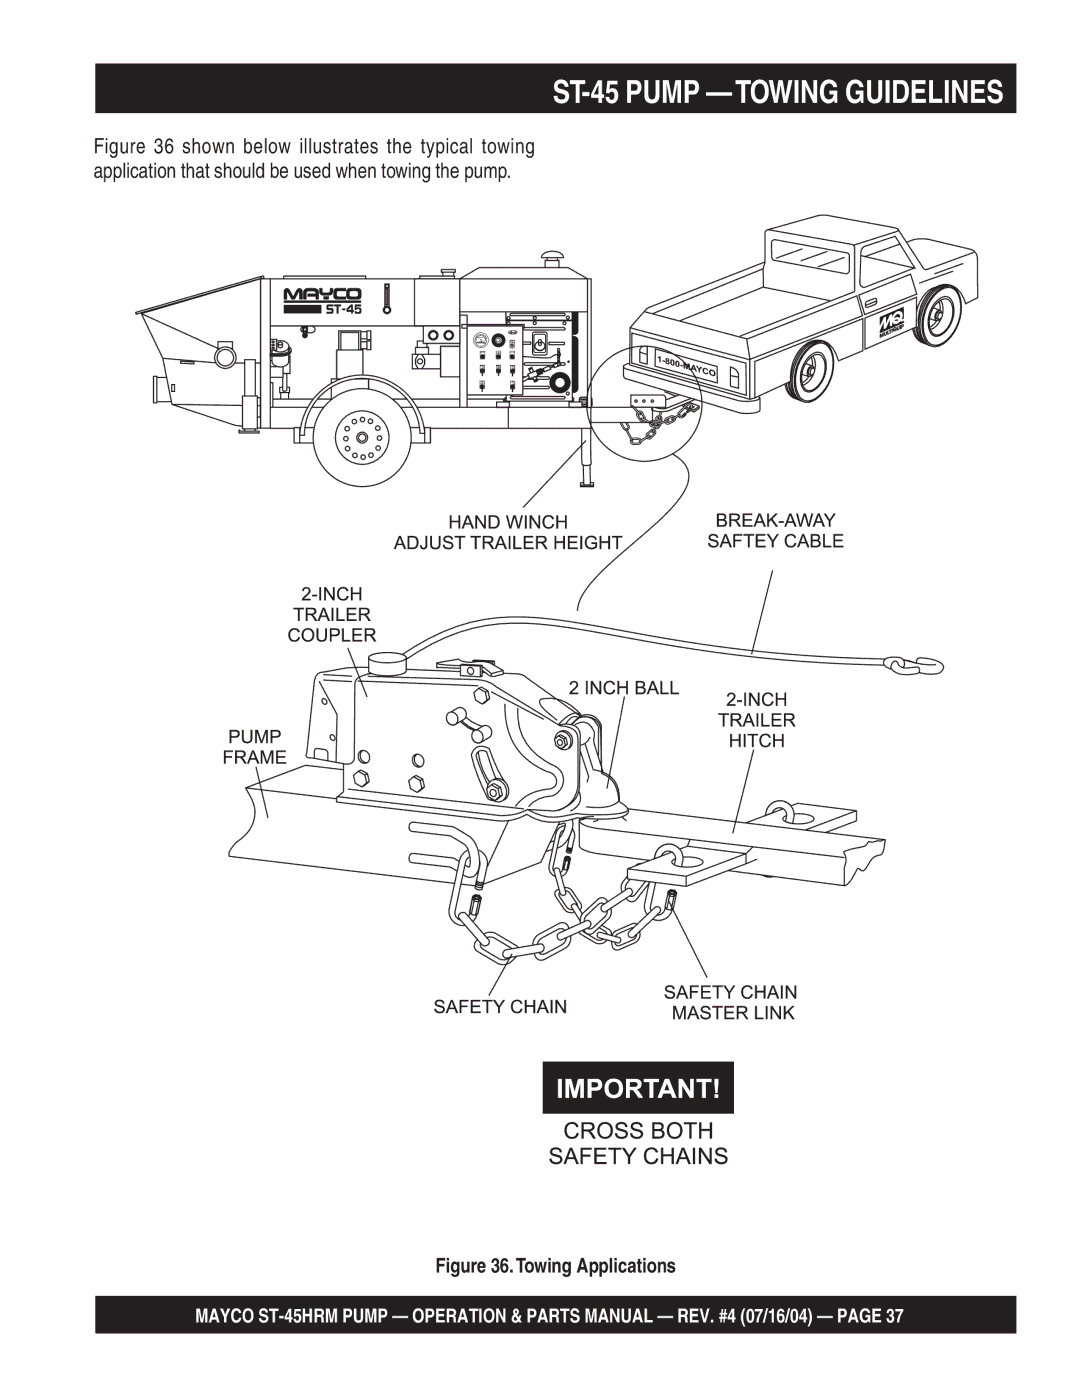 Multiquip ST-45HRM manual ST-45 Pump -TOWING Guidelines, Towing Applications 